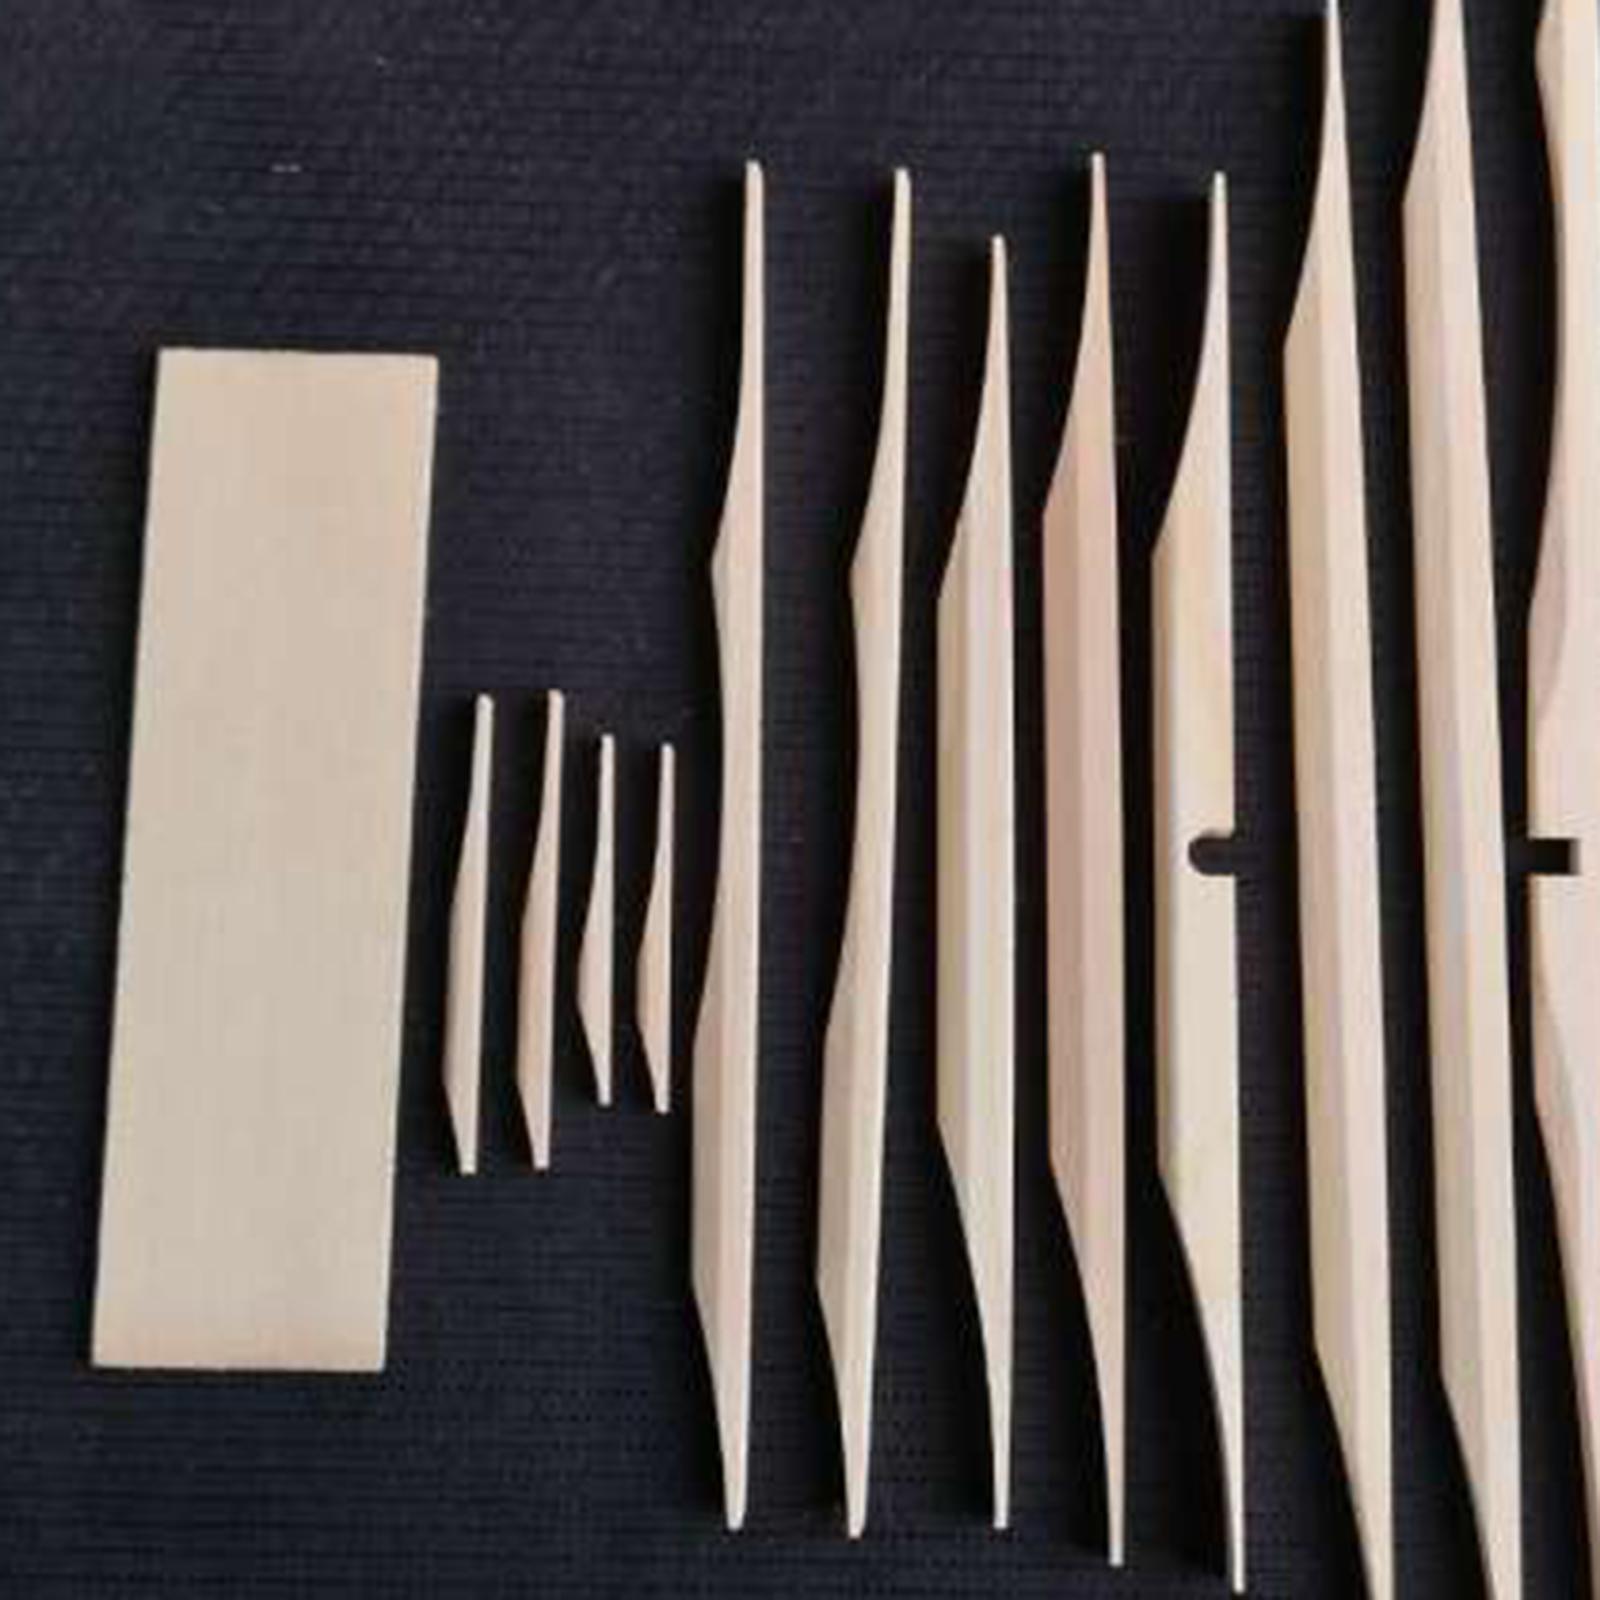 24Pcs Guitar Spruce Brace Kit Tools Accessories Luthier Wooden DIY Tools